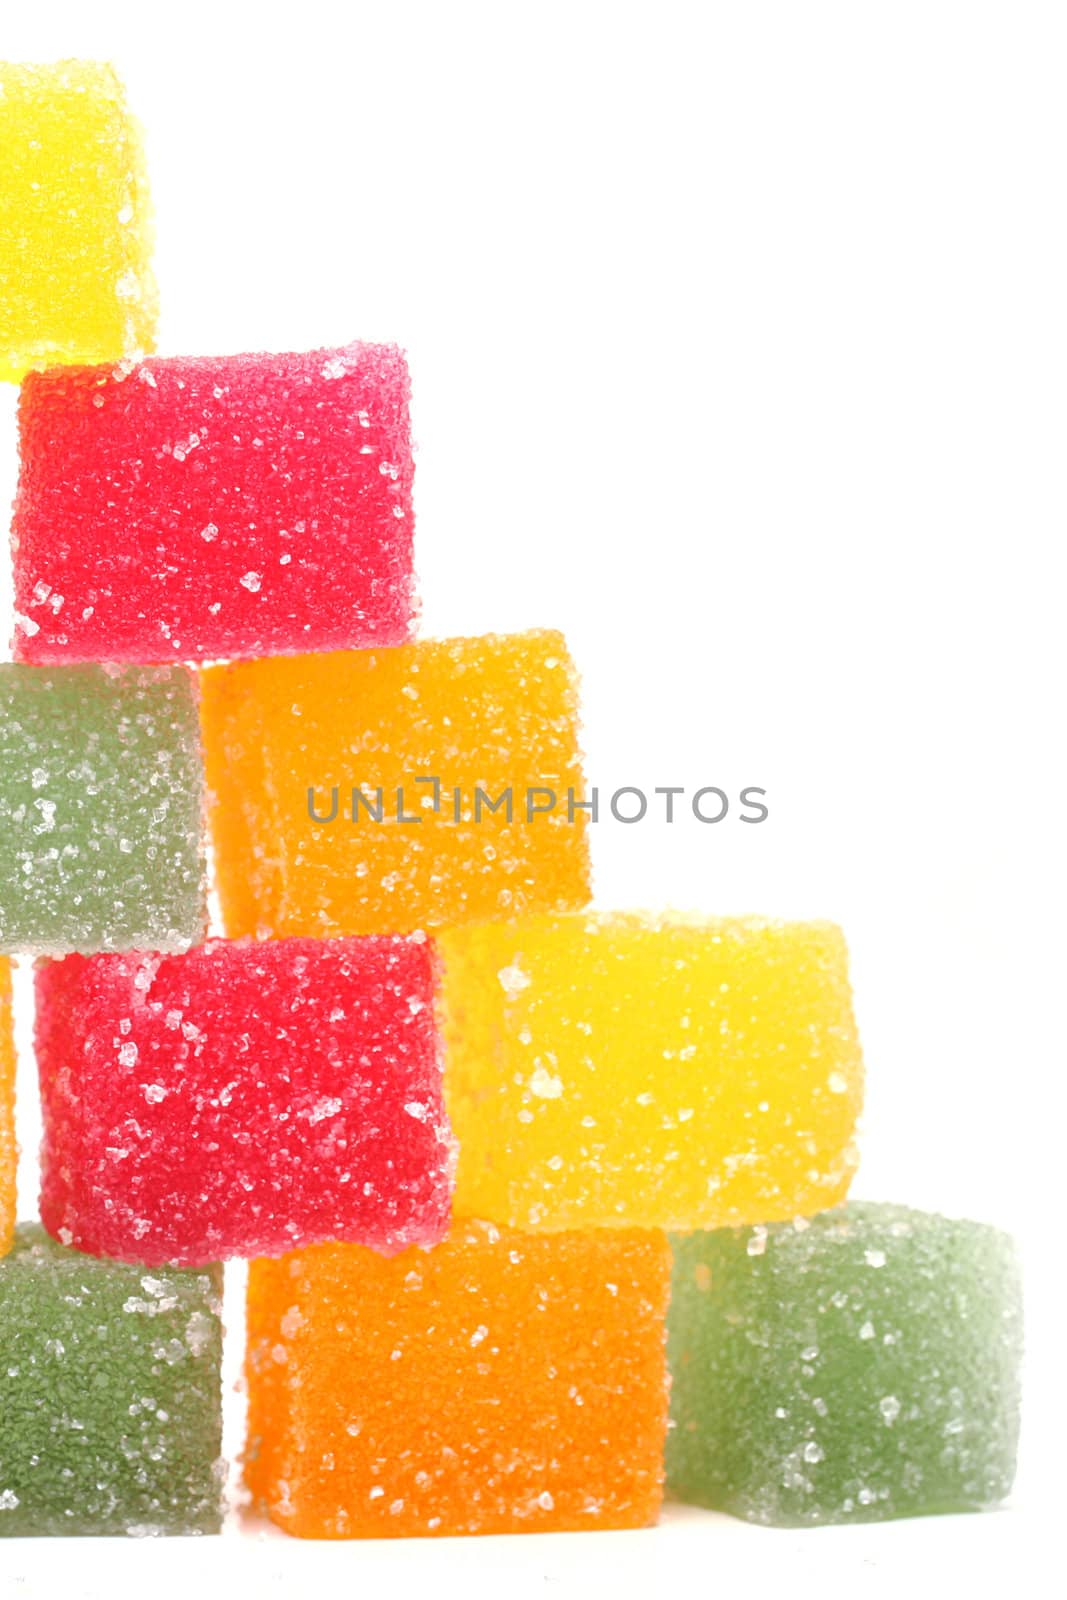 Delicious colored marmalade isolated on a white